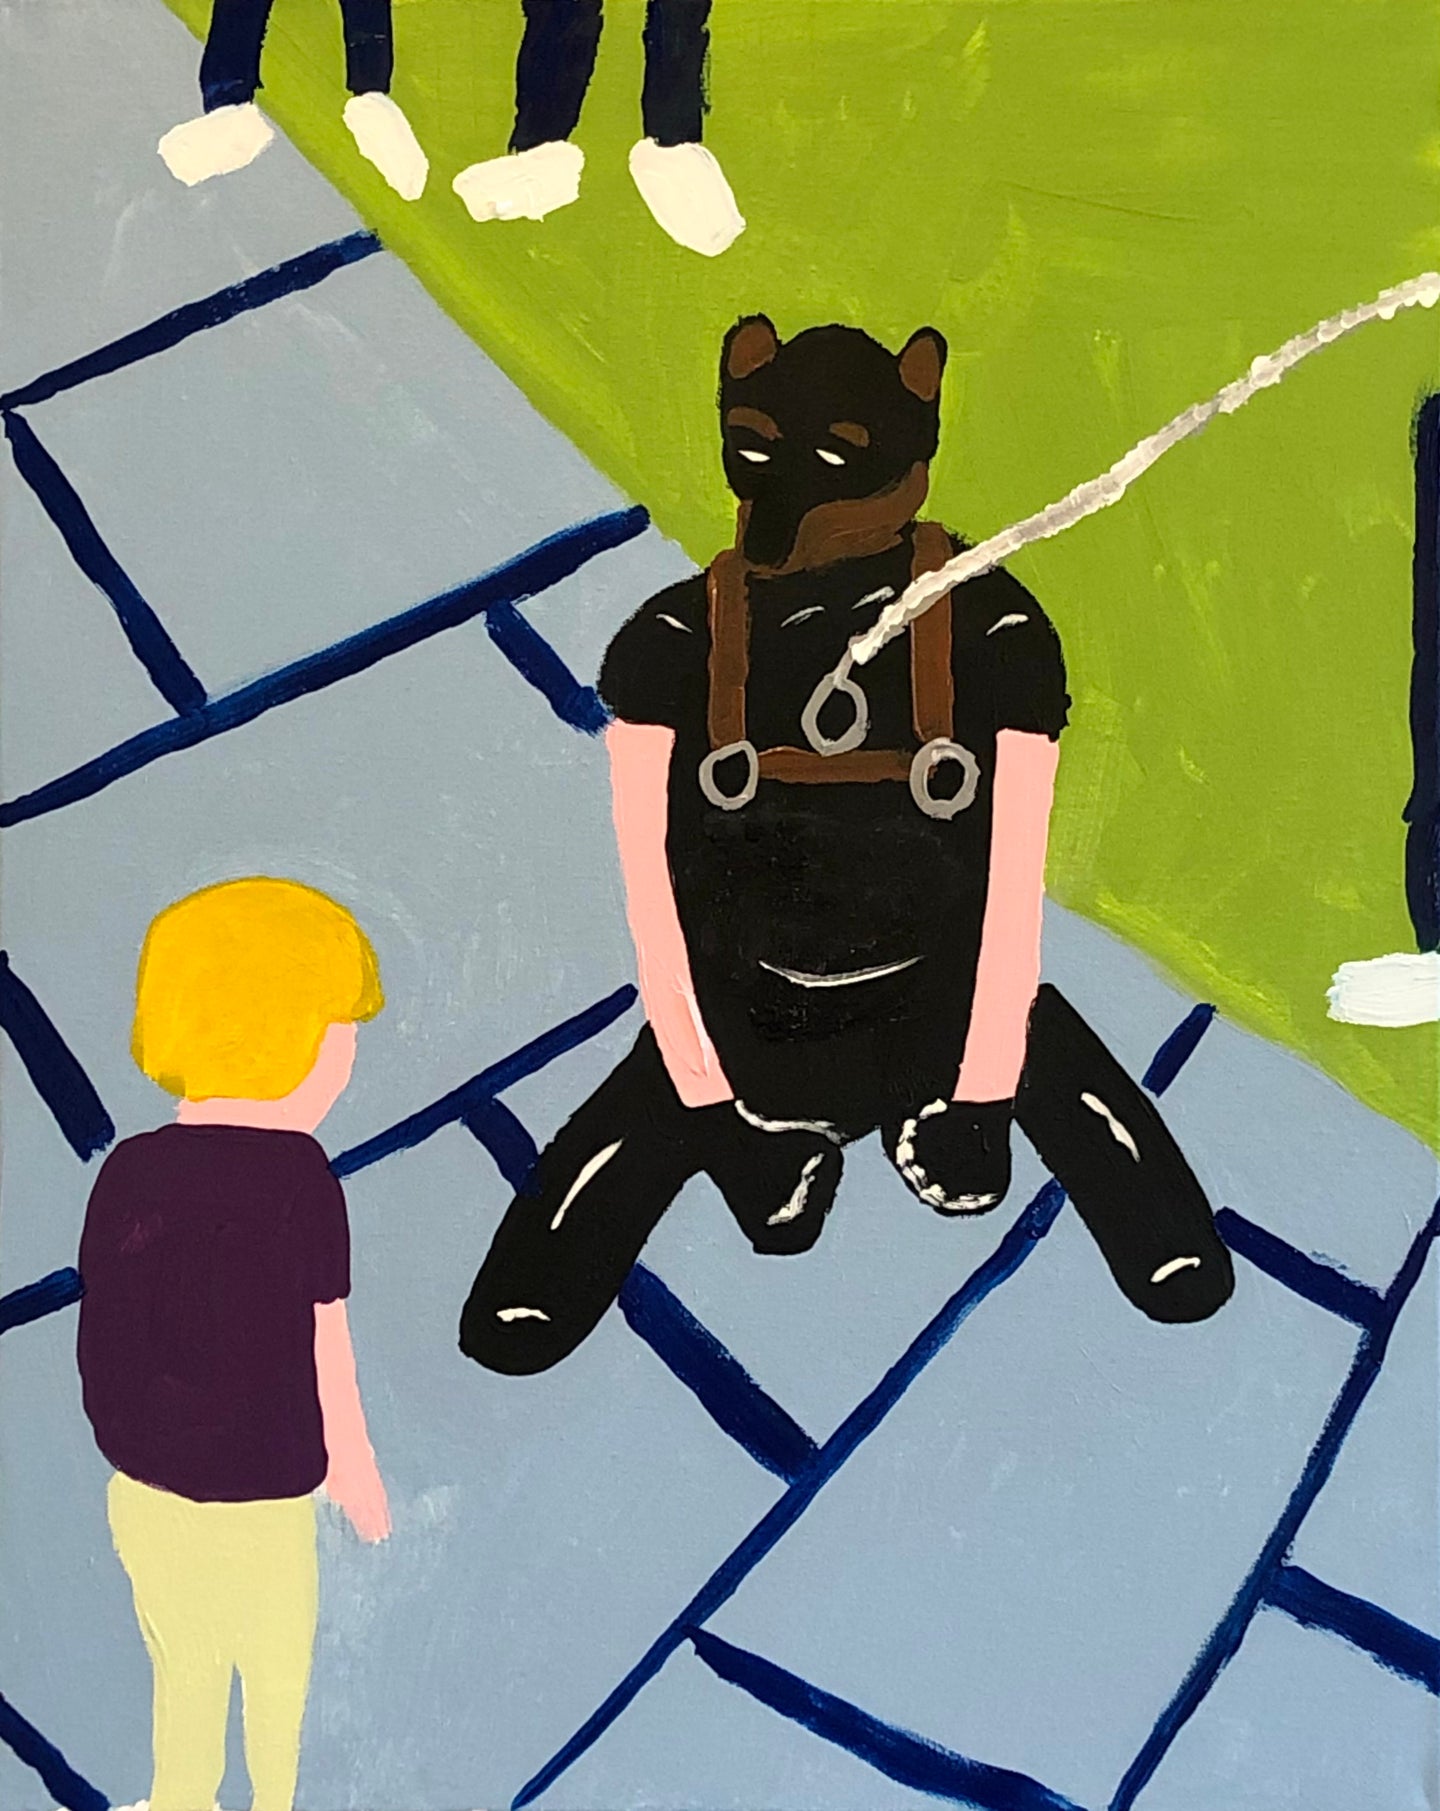 Leather Puppy on Leash in Front of Child